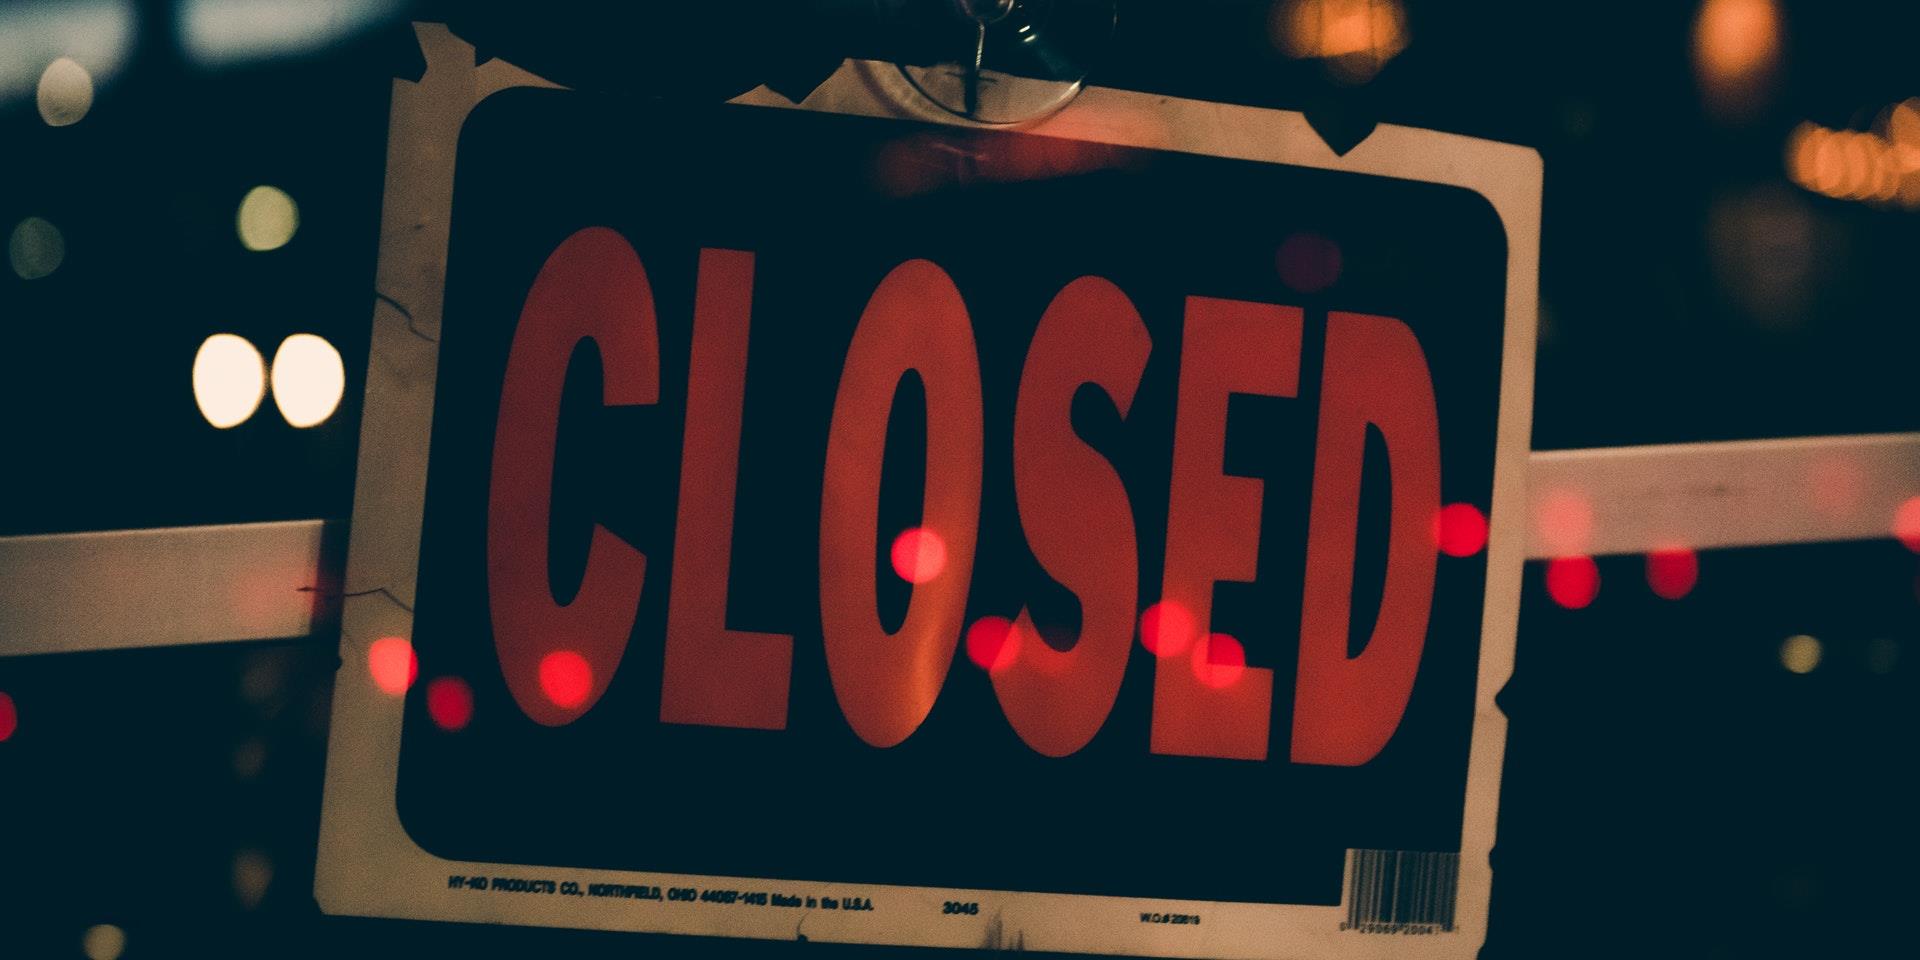 A photo of a closed sign